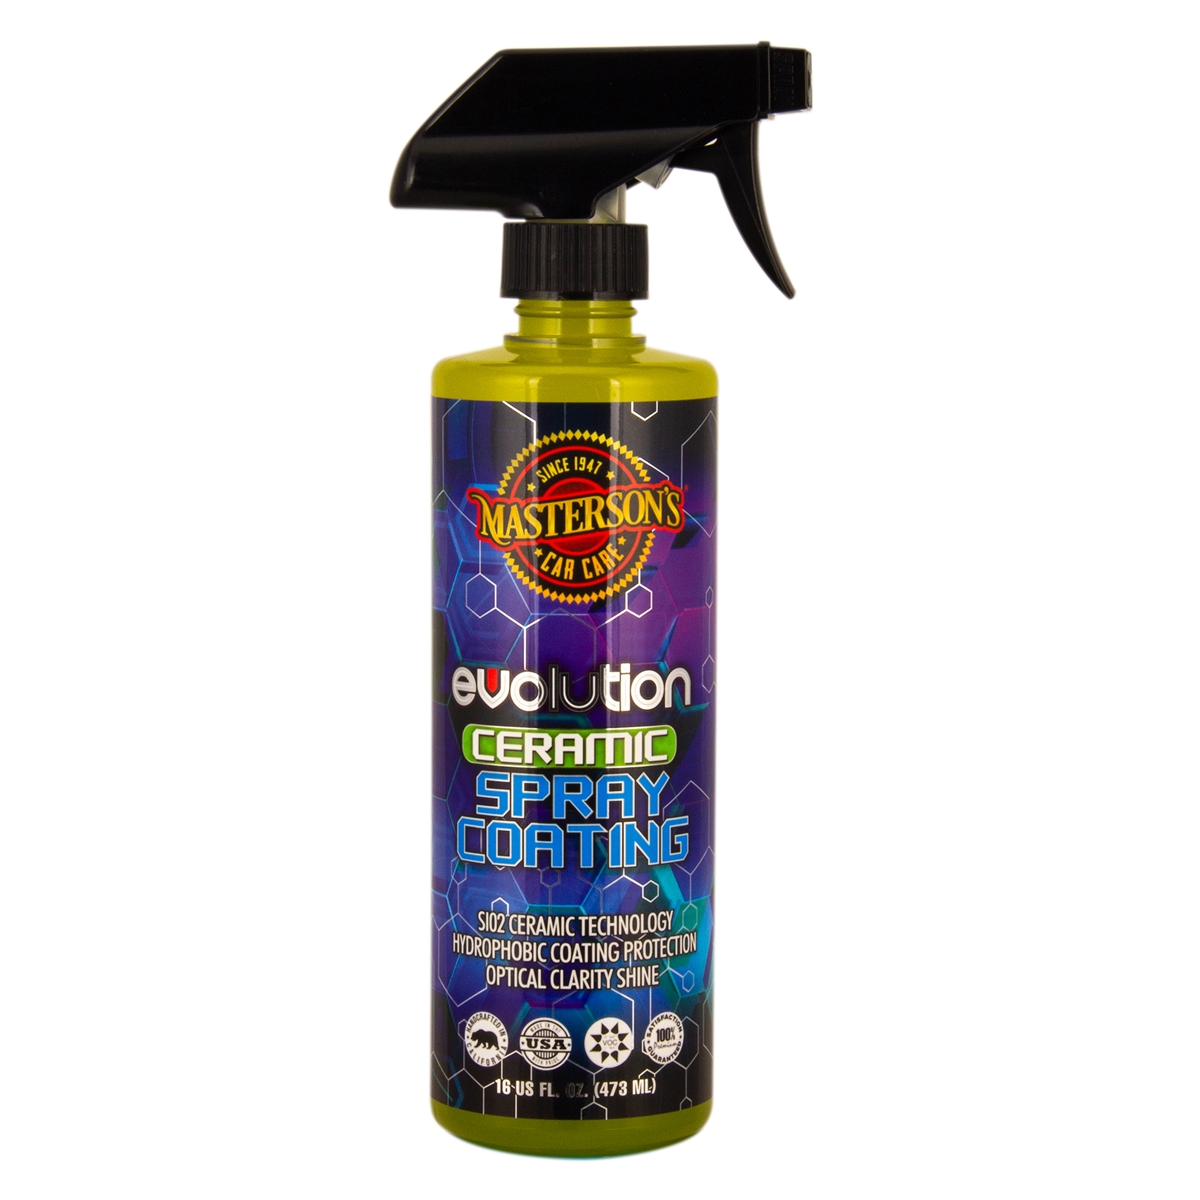 Ceramic Coating Spray – The 15 best products compared - Your Motor